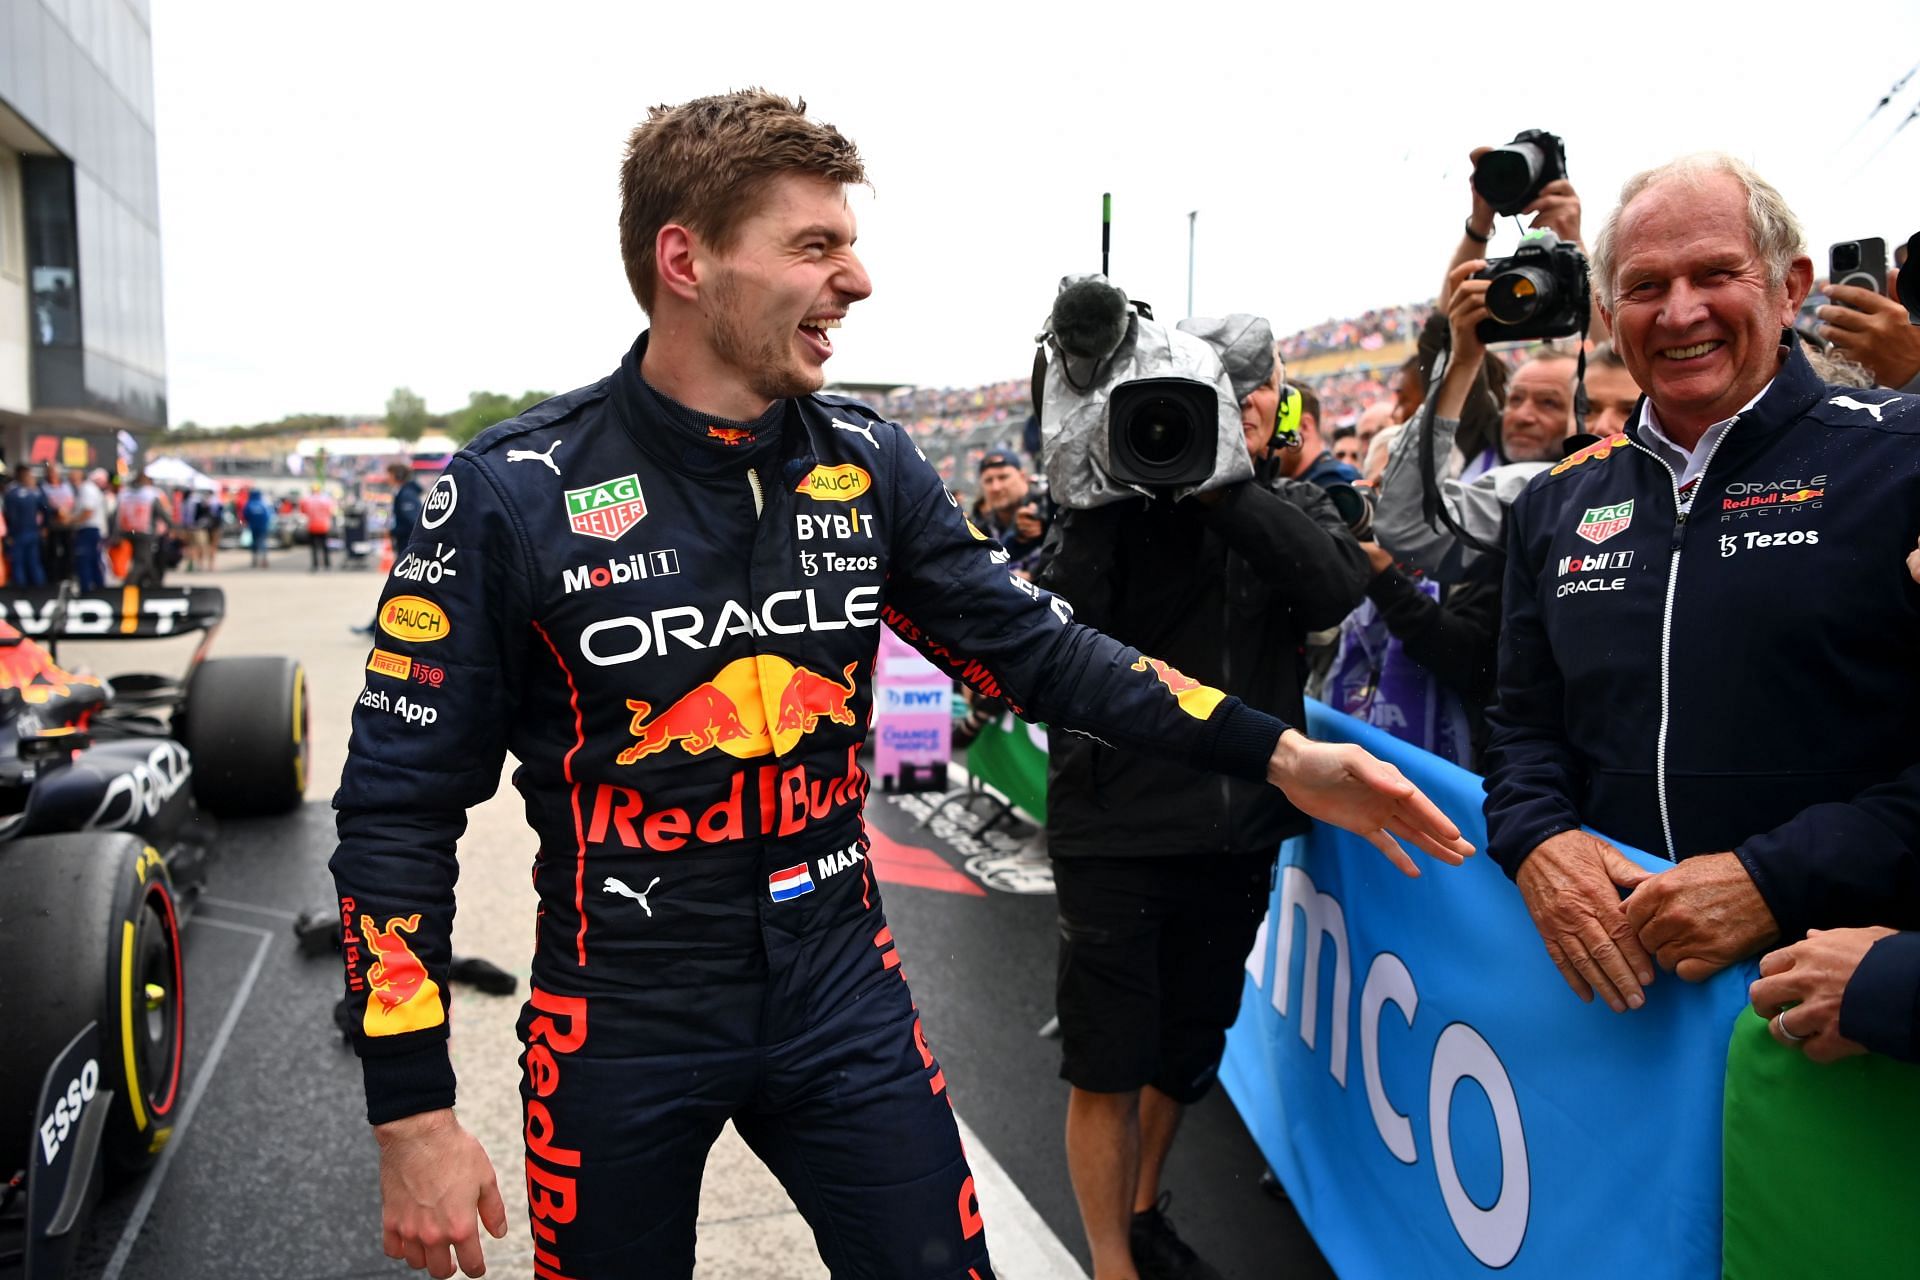 Max Verstappen has been dominant in the first half of the season